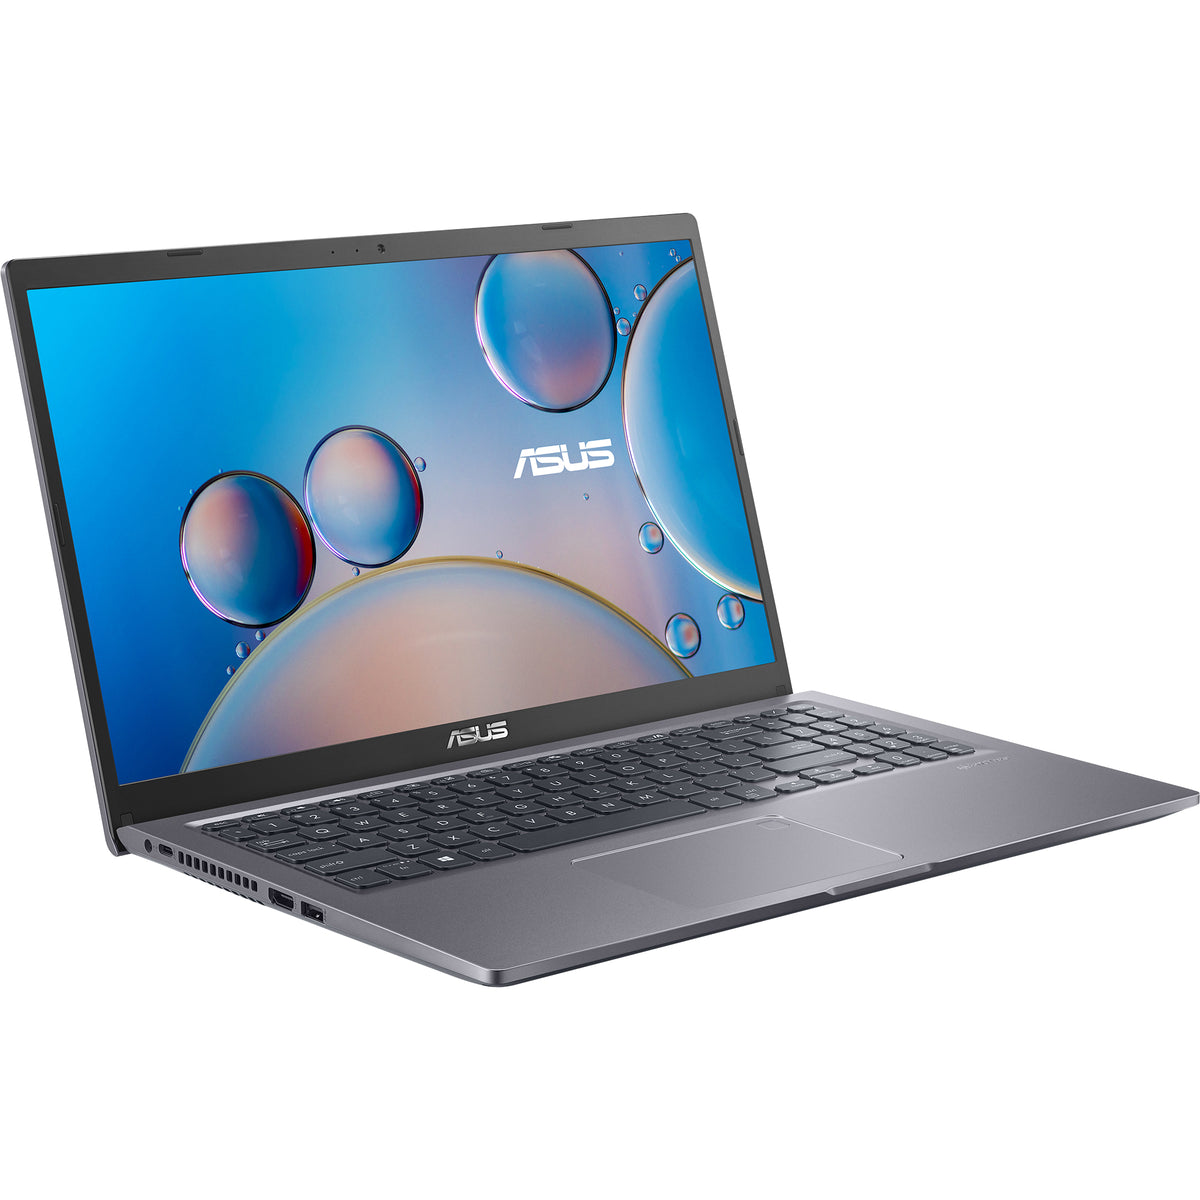 NB ASUS Laptop M515DA - R5 3500U 8GB 256GB SSD 15.6P FHD Radeon Vega 8 Graphics S/OS 3Yr - Silver